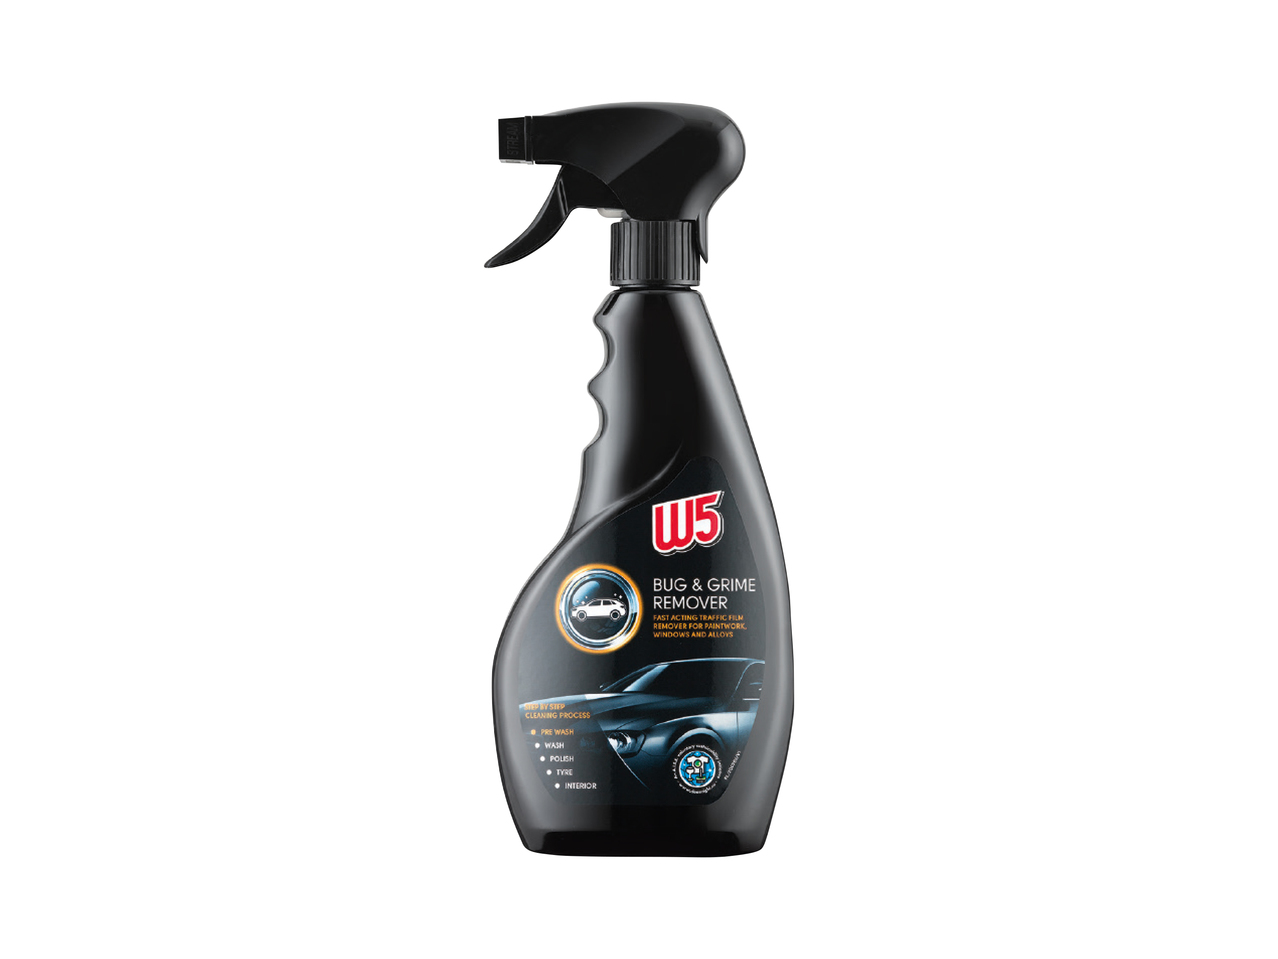 W5 Bug & Grime Remover1